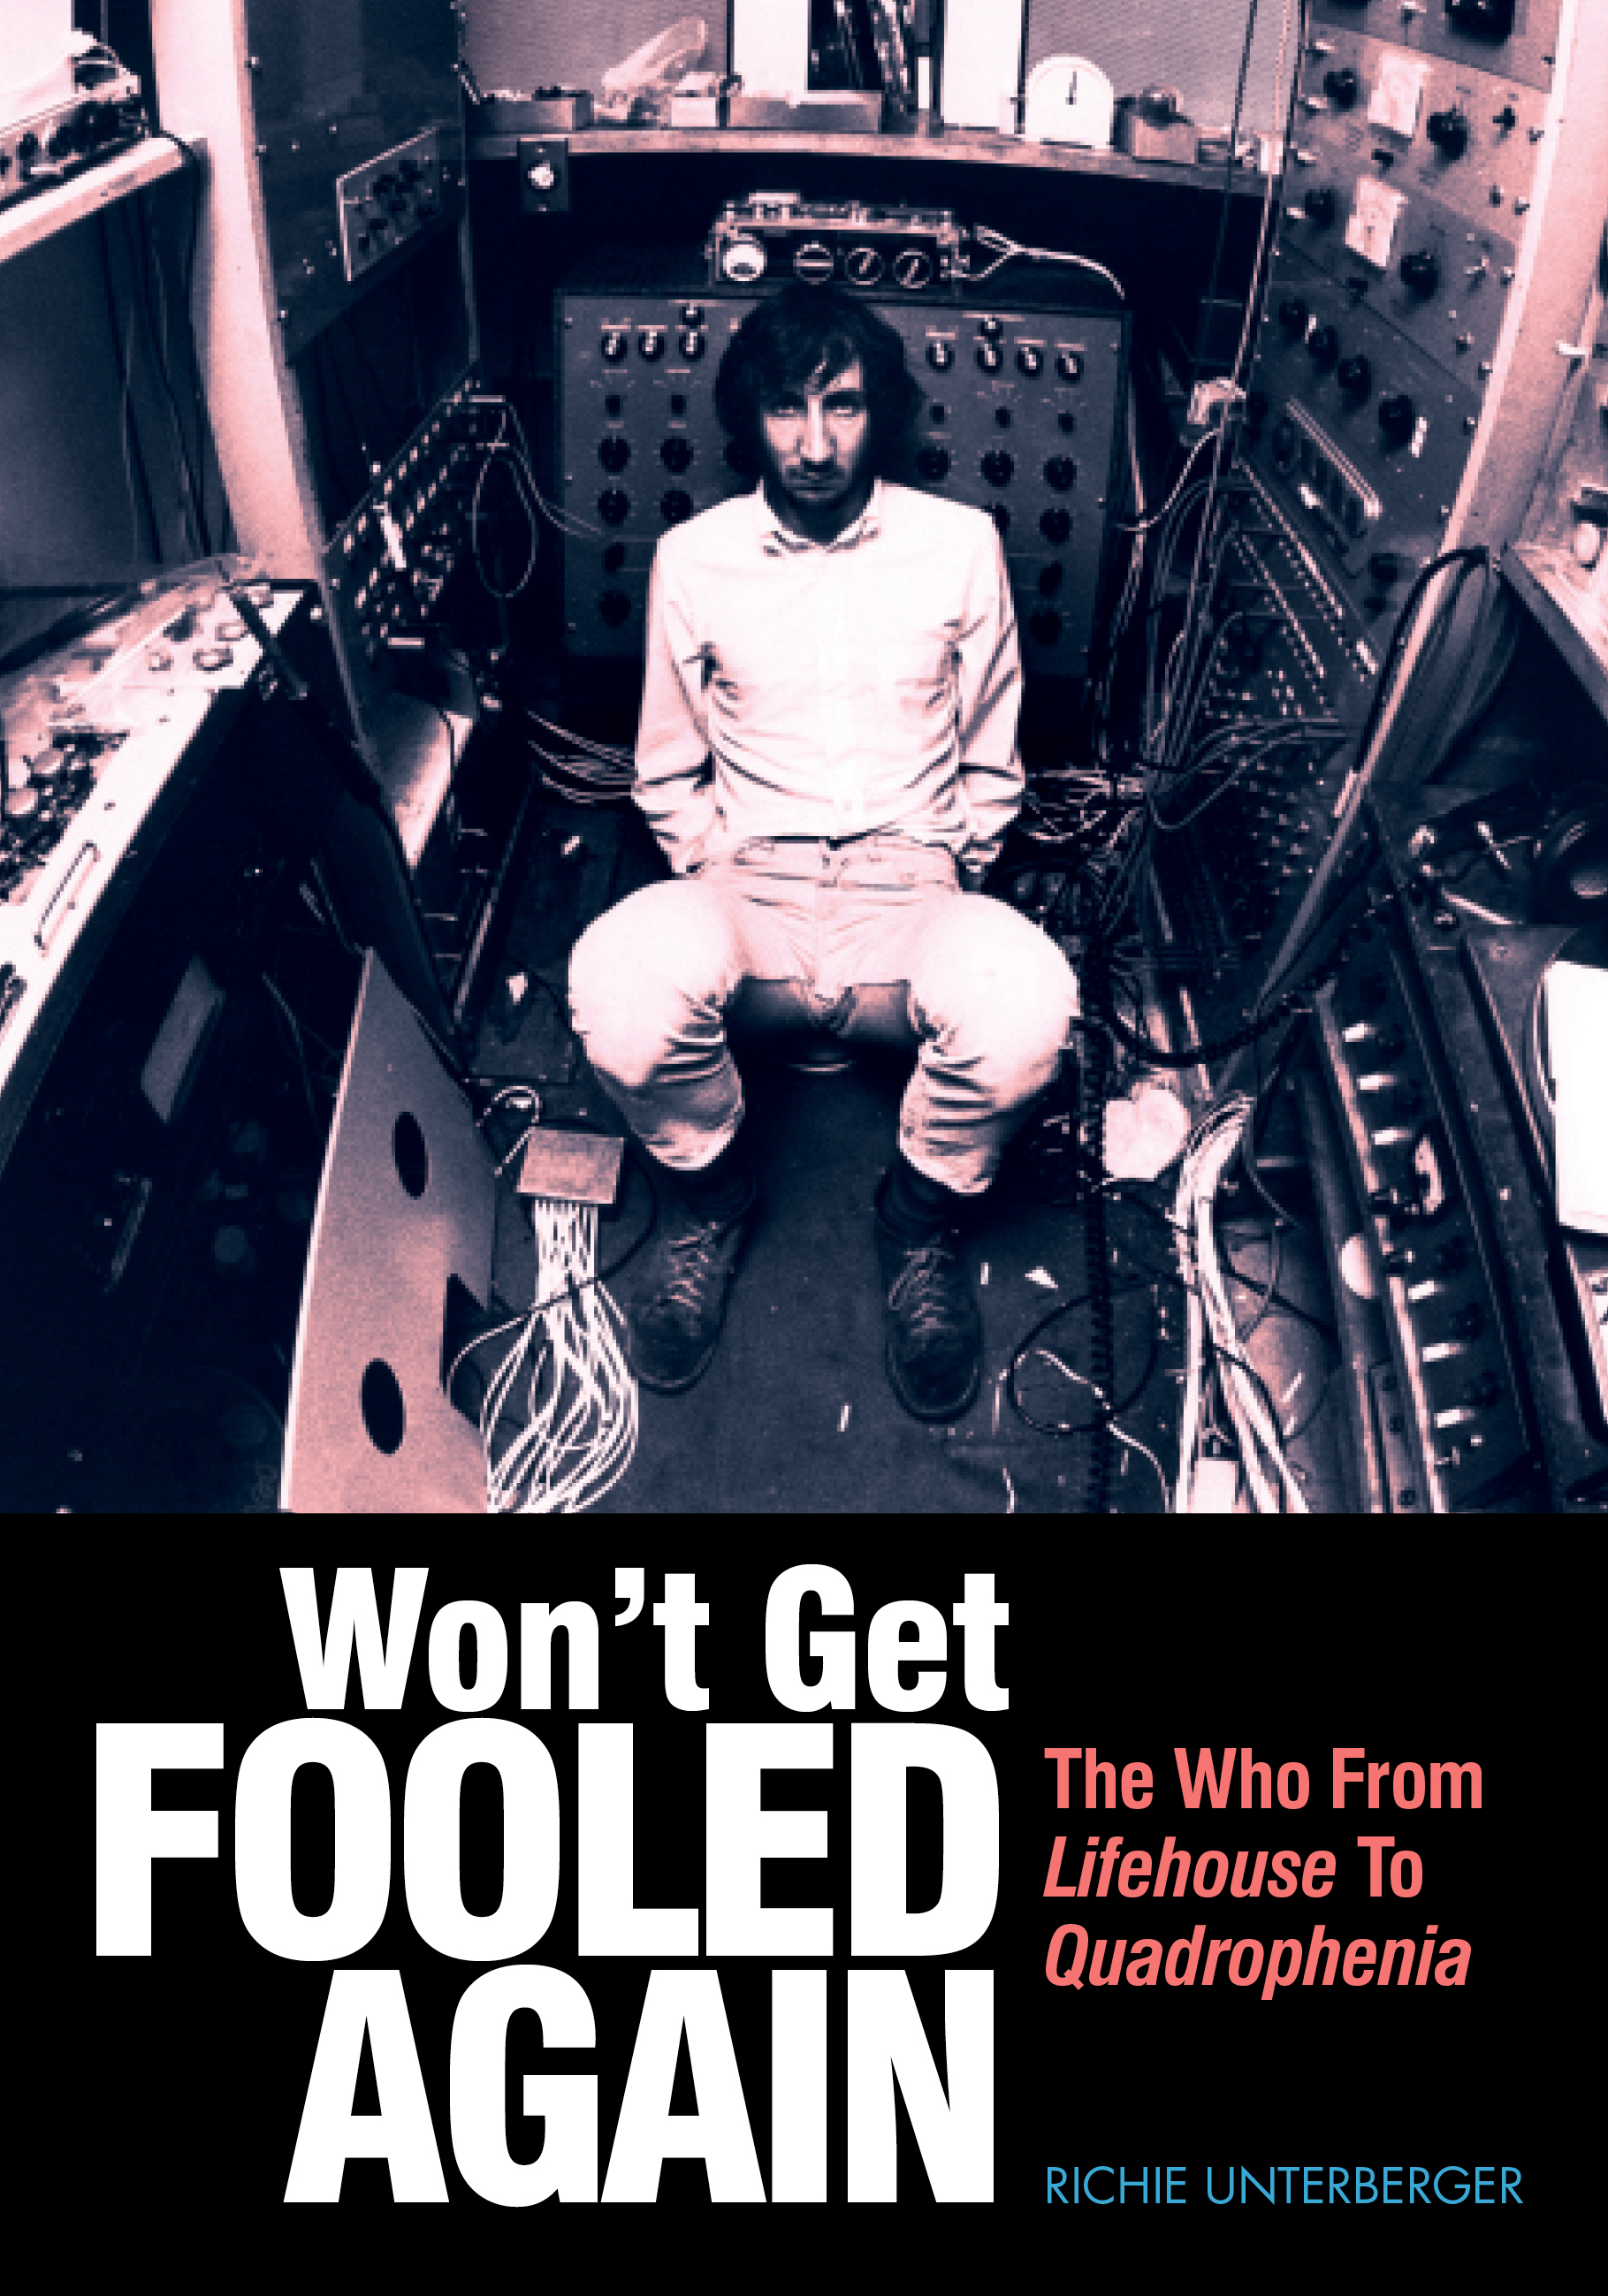 Won't Get Fooled Again: The Who from Lifehouse to Quadrophenia